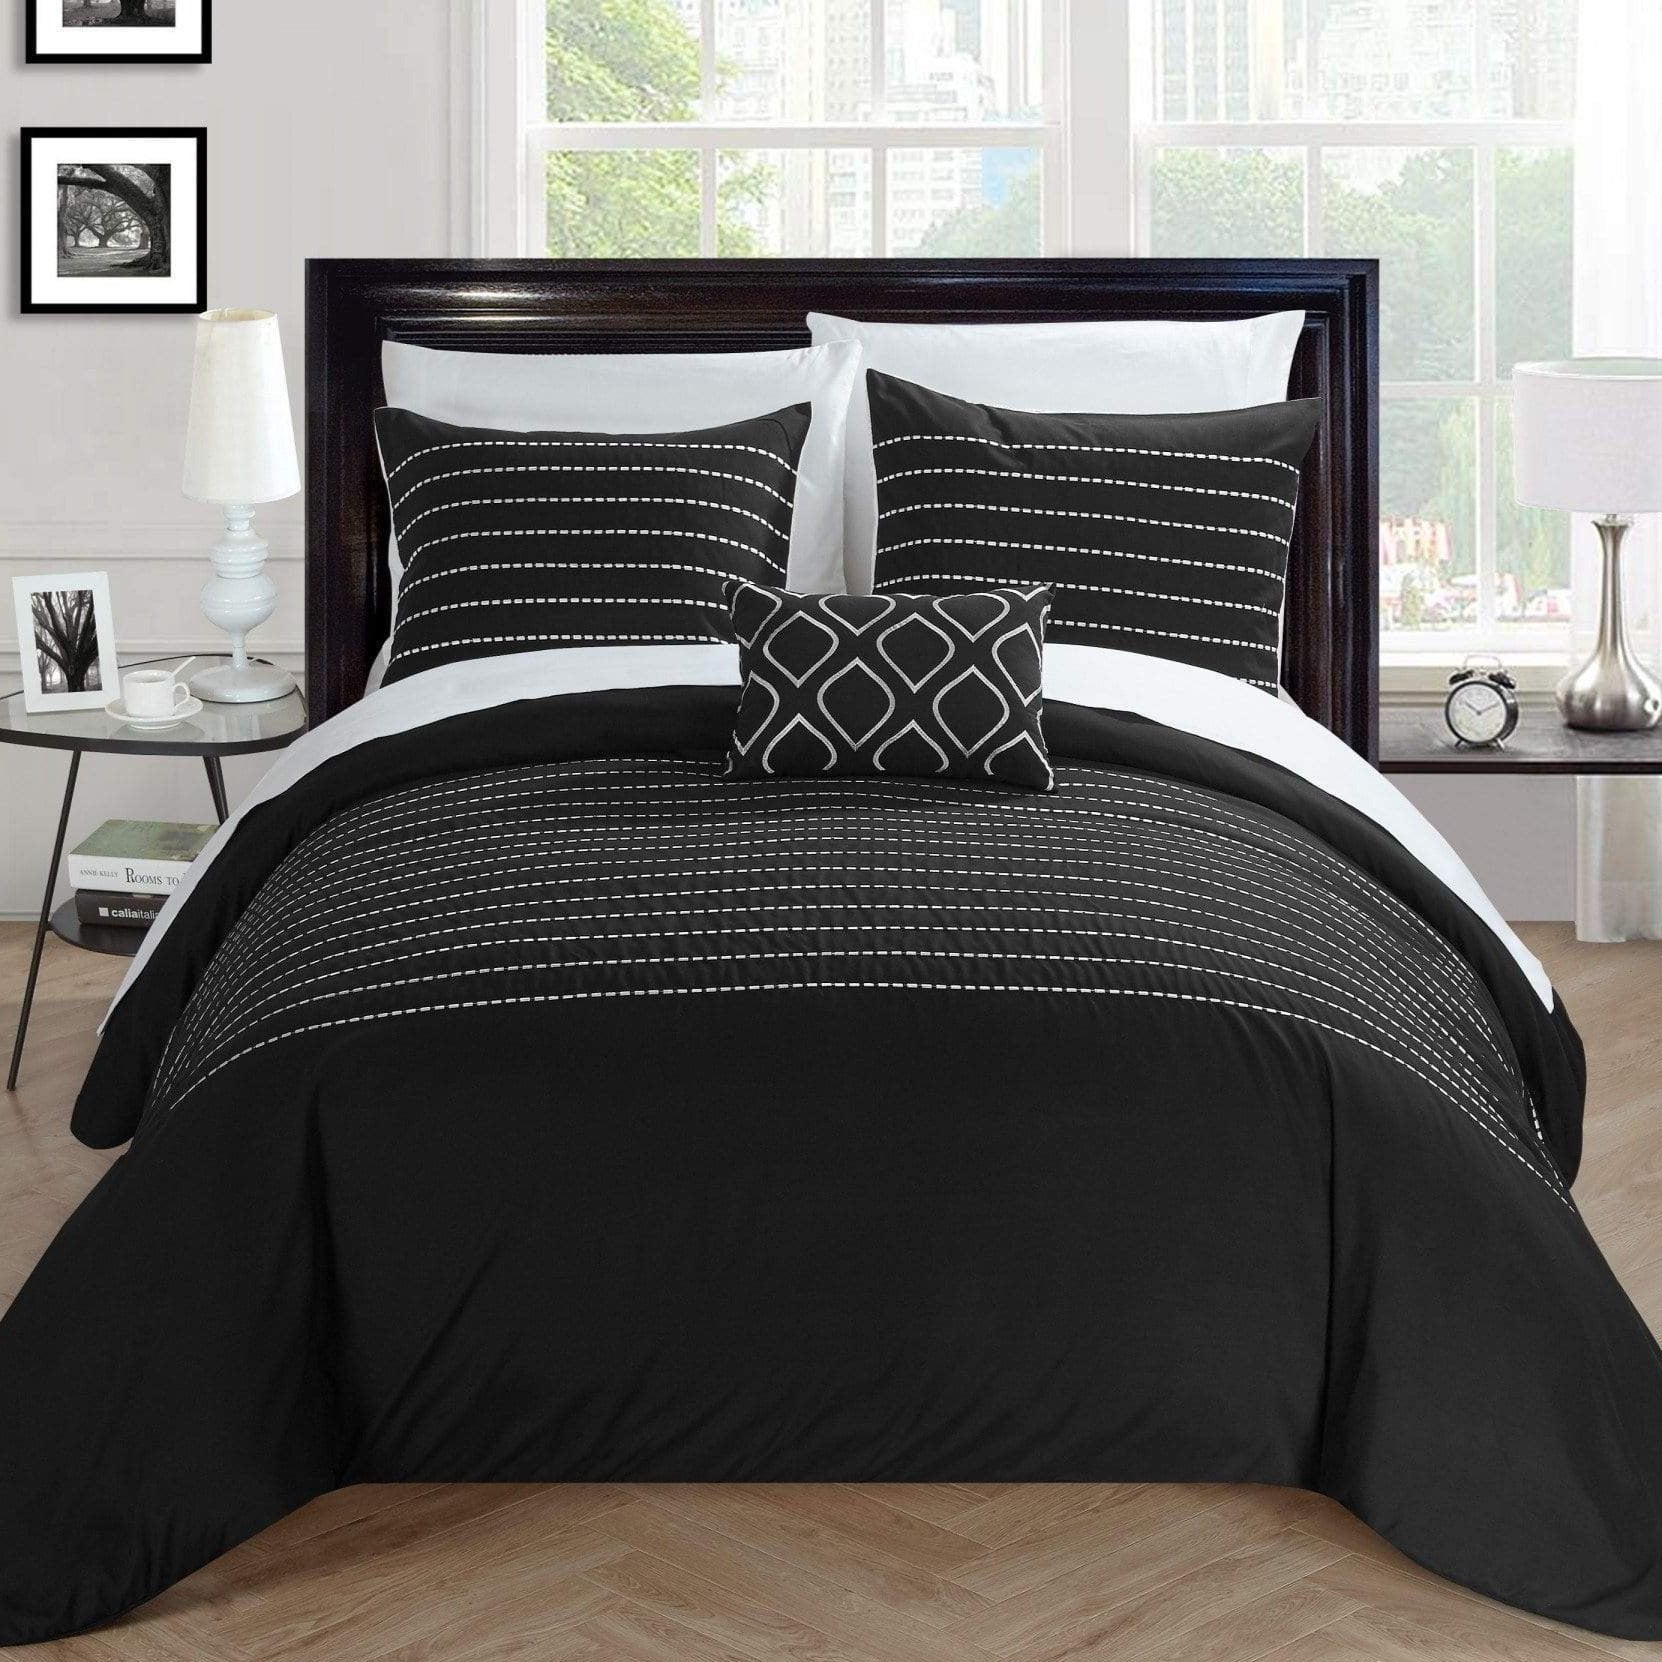 Bea 4 Piece Embroidered Duvet Cover Set